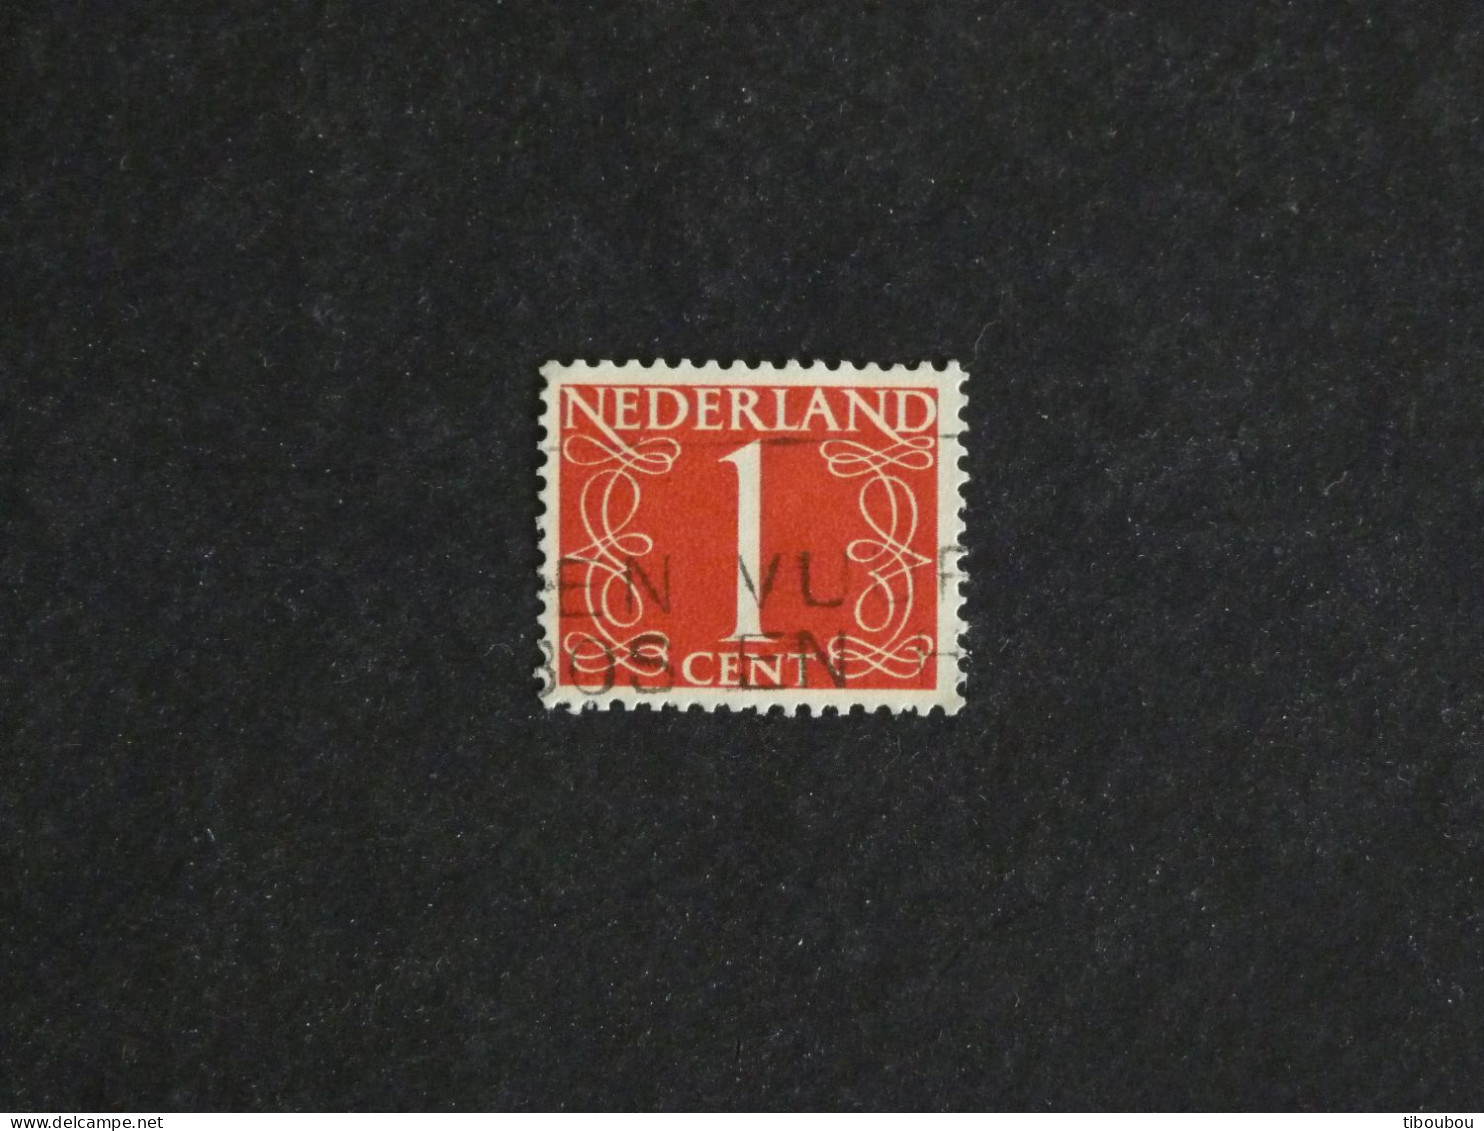 PAYS BAS NEDERLAND YT 457 OBLITERE - CHIFFRE - Used Stamps